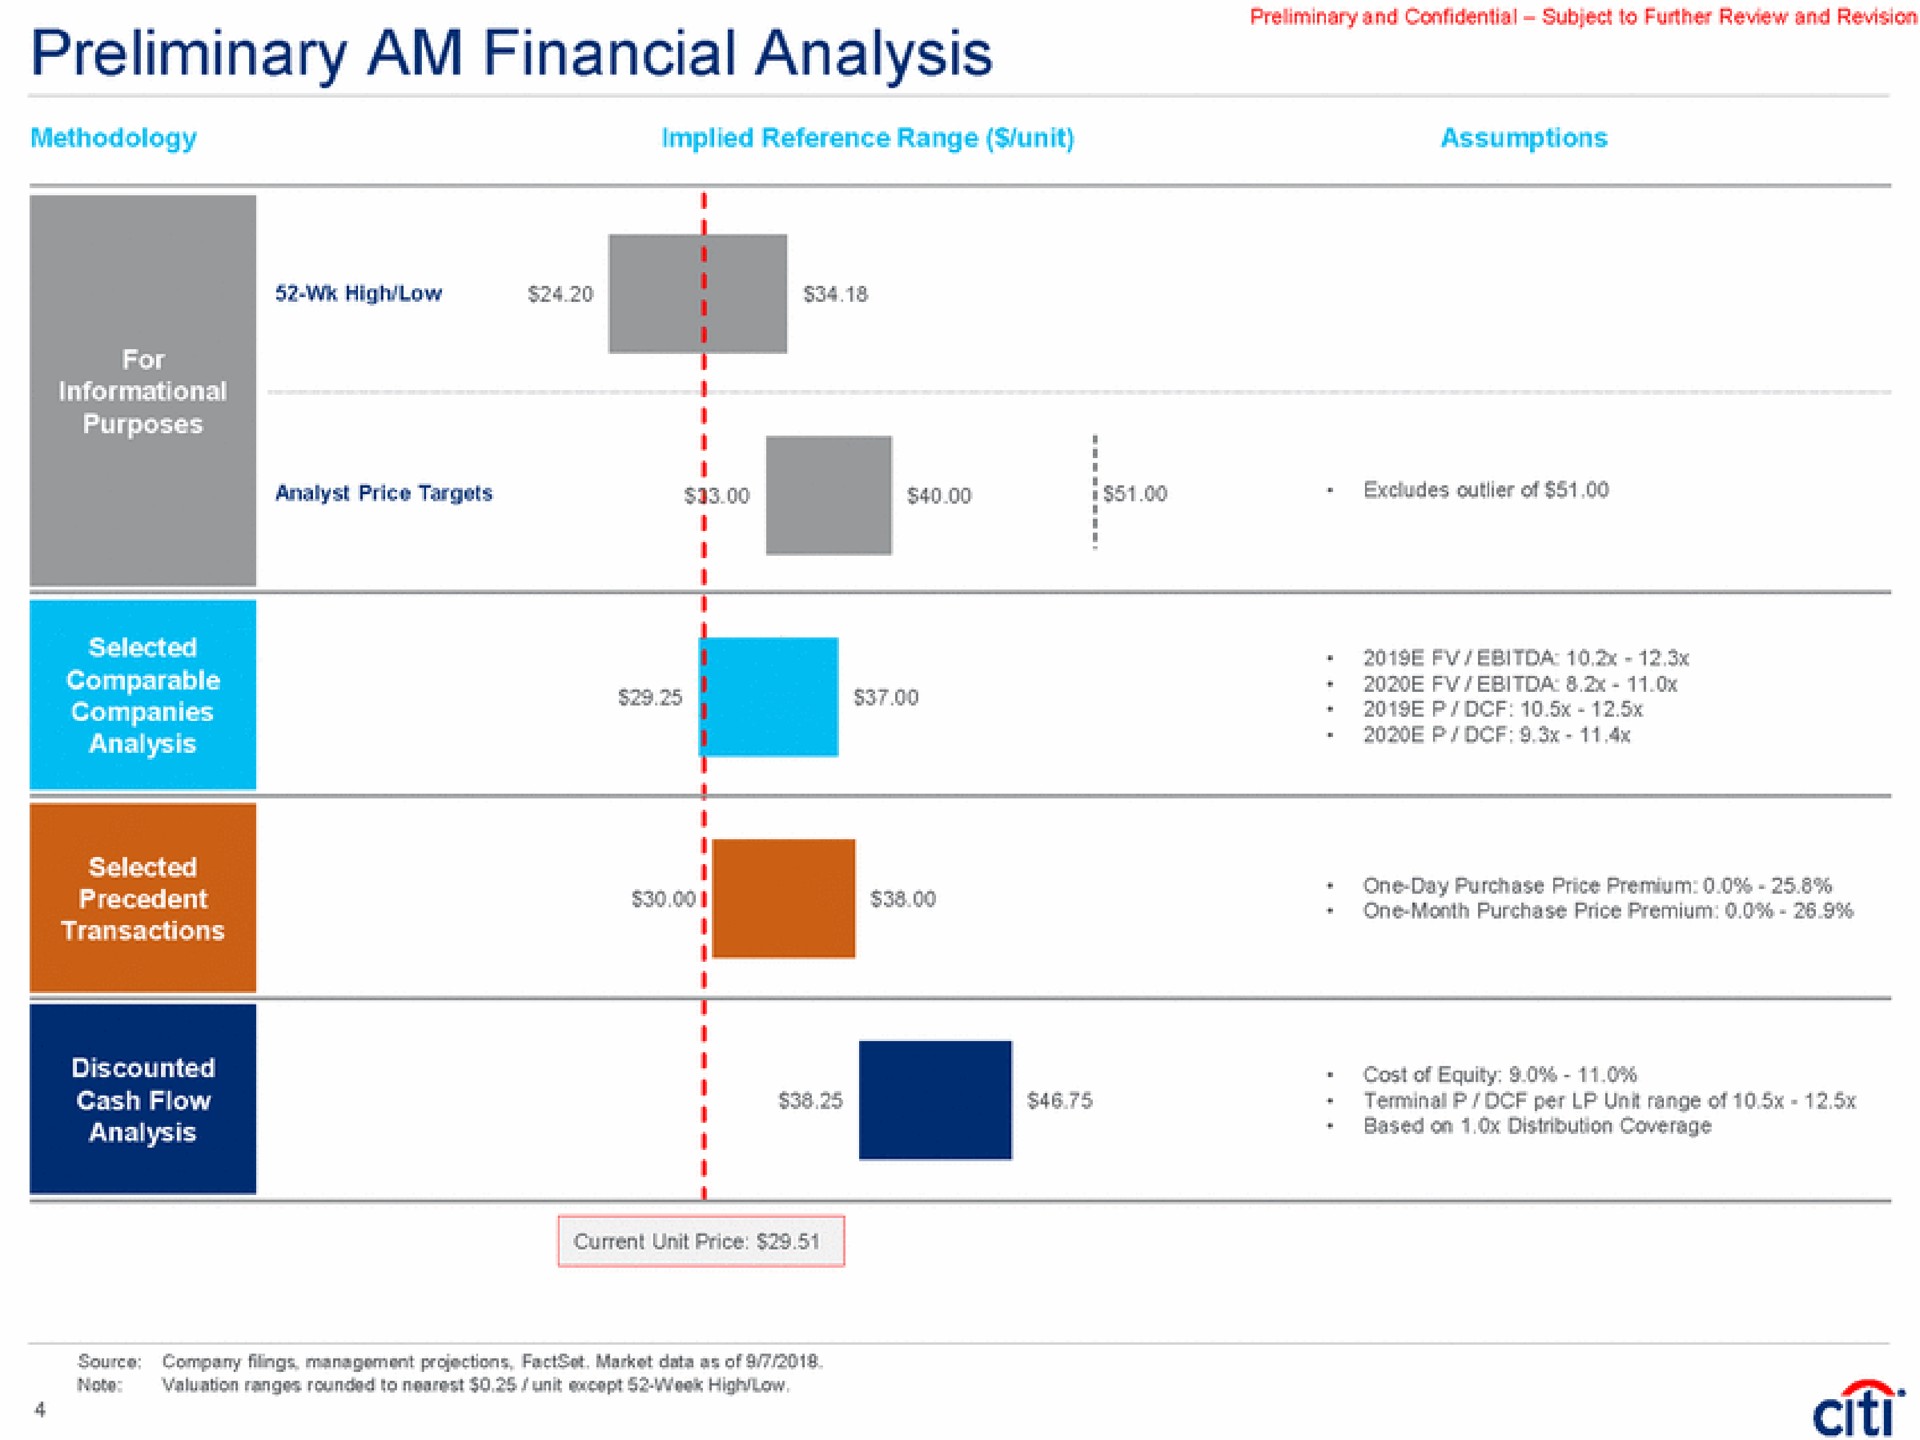 preliminary am financial analysis methodology implied reference range unit assumptions steer precedent one month purchase price premium | Citi